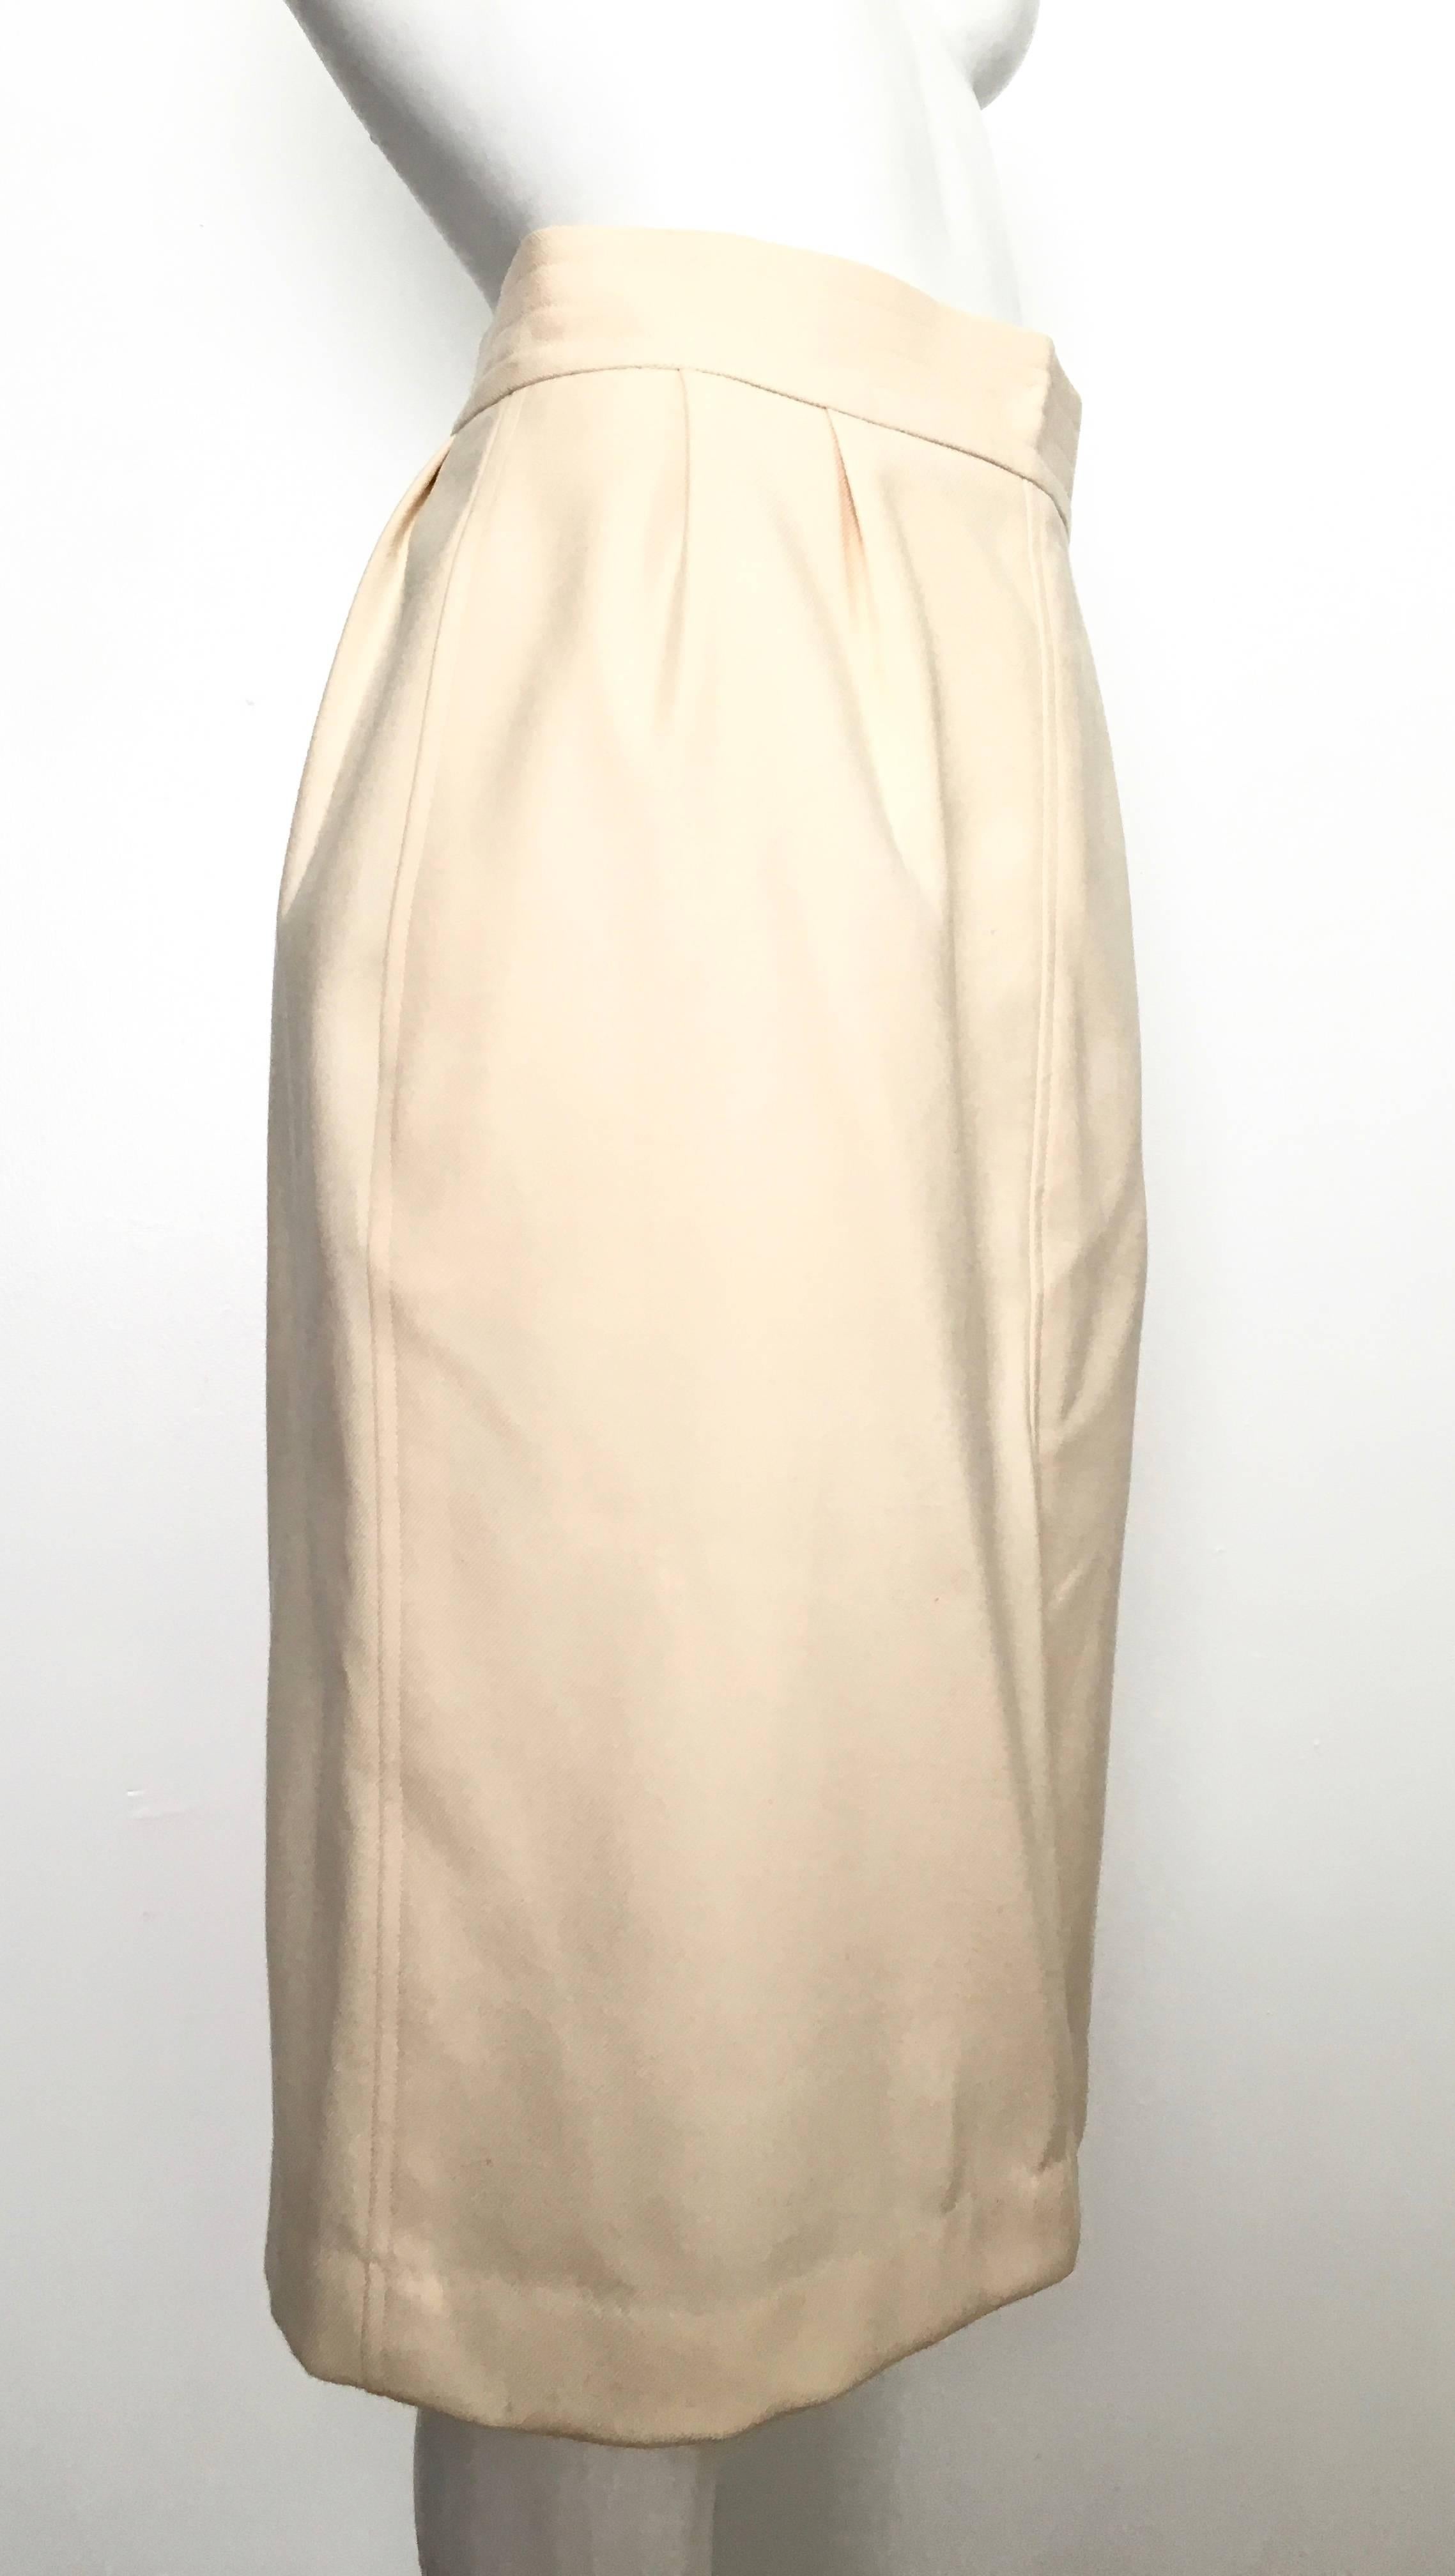 Saint Laurent Rive Gauche 1980s wool cream pencil skirt with pockets is a French size 40 and fits like a 4/6. The waist on this skirt is 27